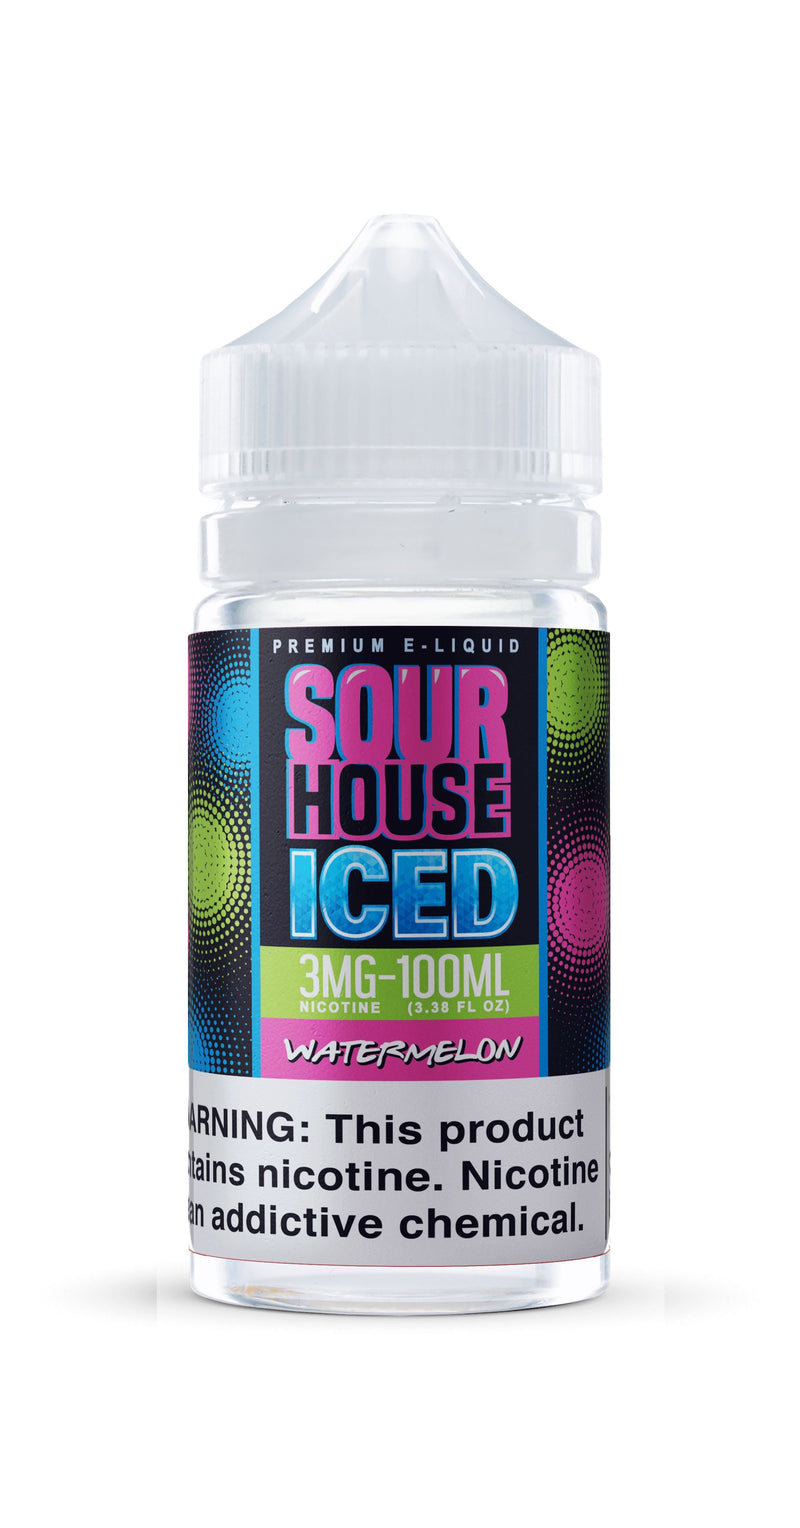 Watermelon by Sour House Iced 100ml bottle